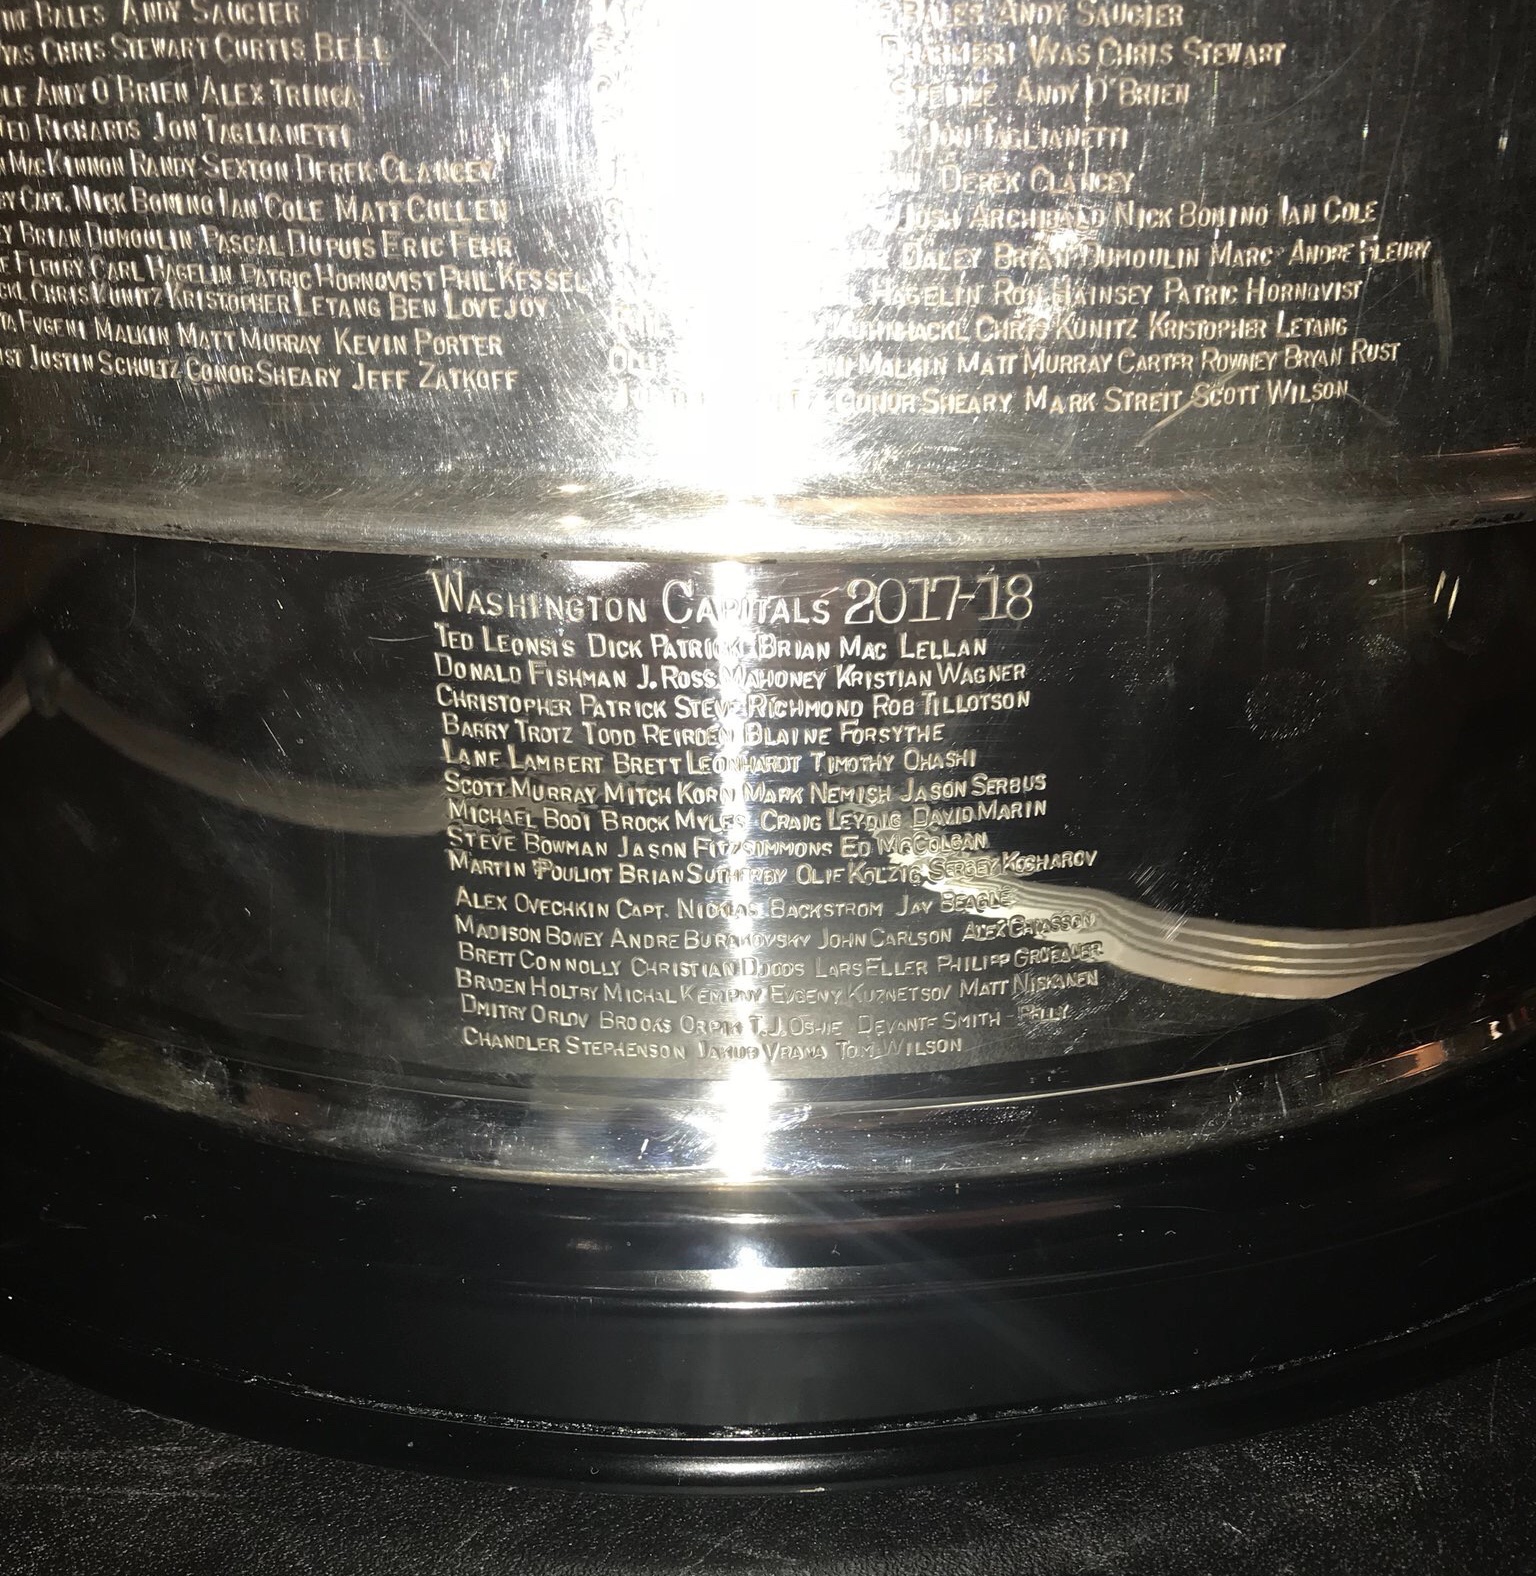 Who Gets Their Name on the Stanley Cup?